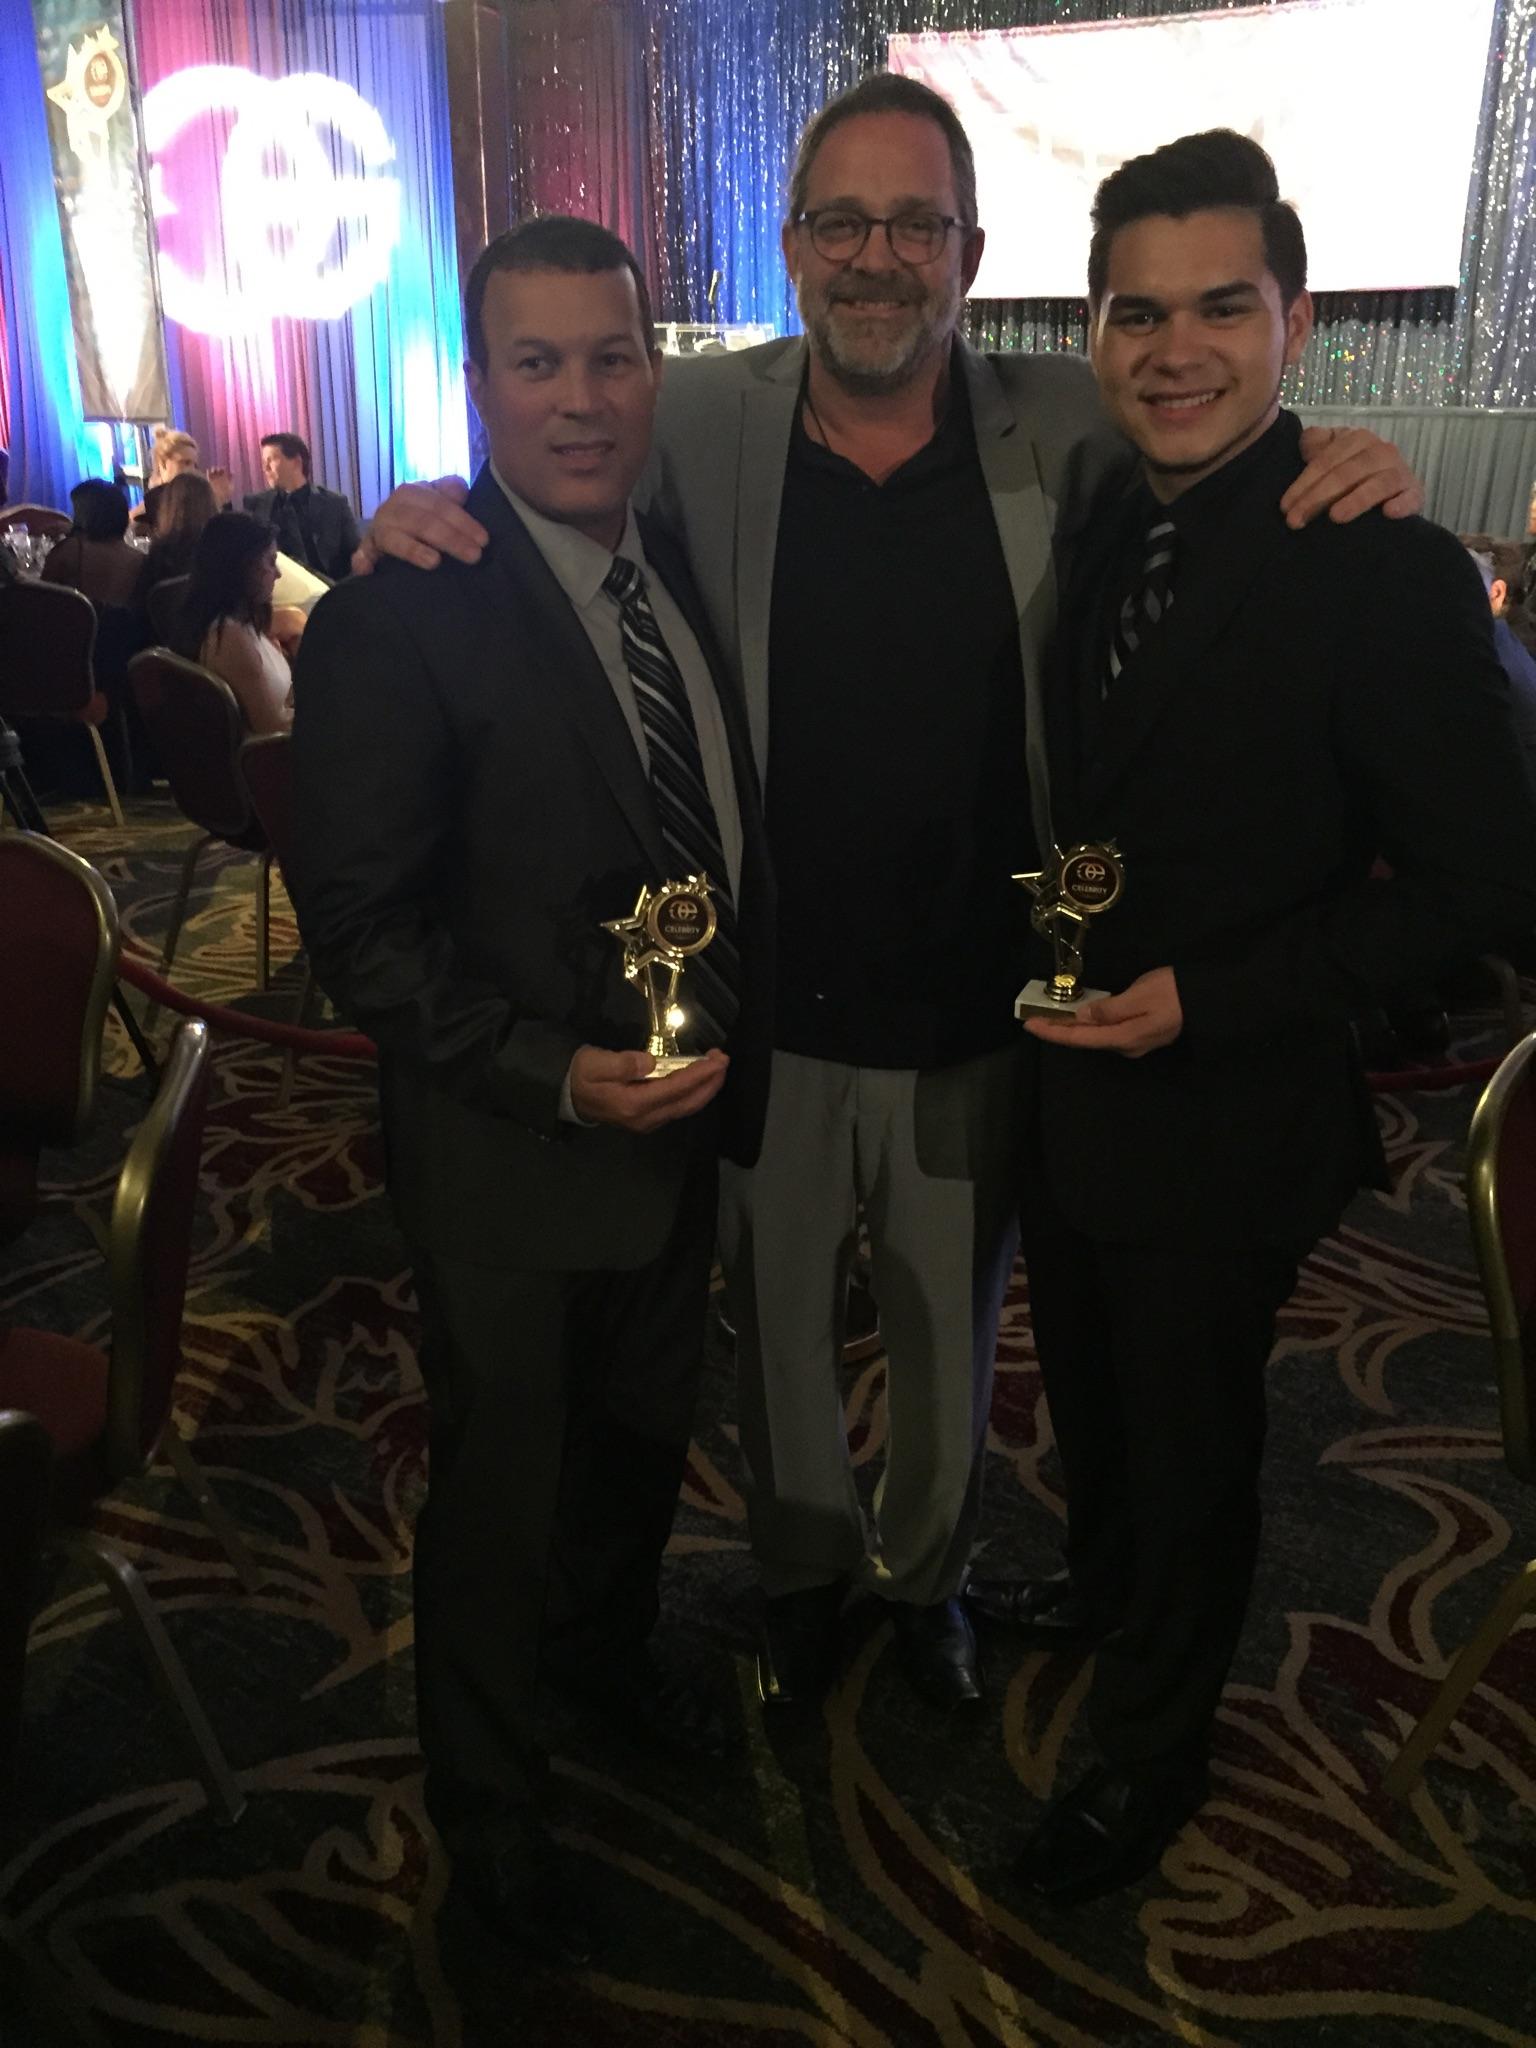 Won best male commercial actor category. Thanks to our coach and mentor Jonathan Goldstein